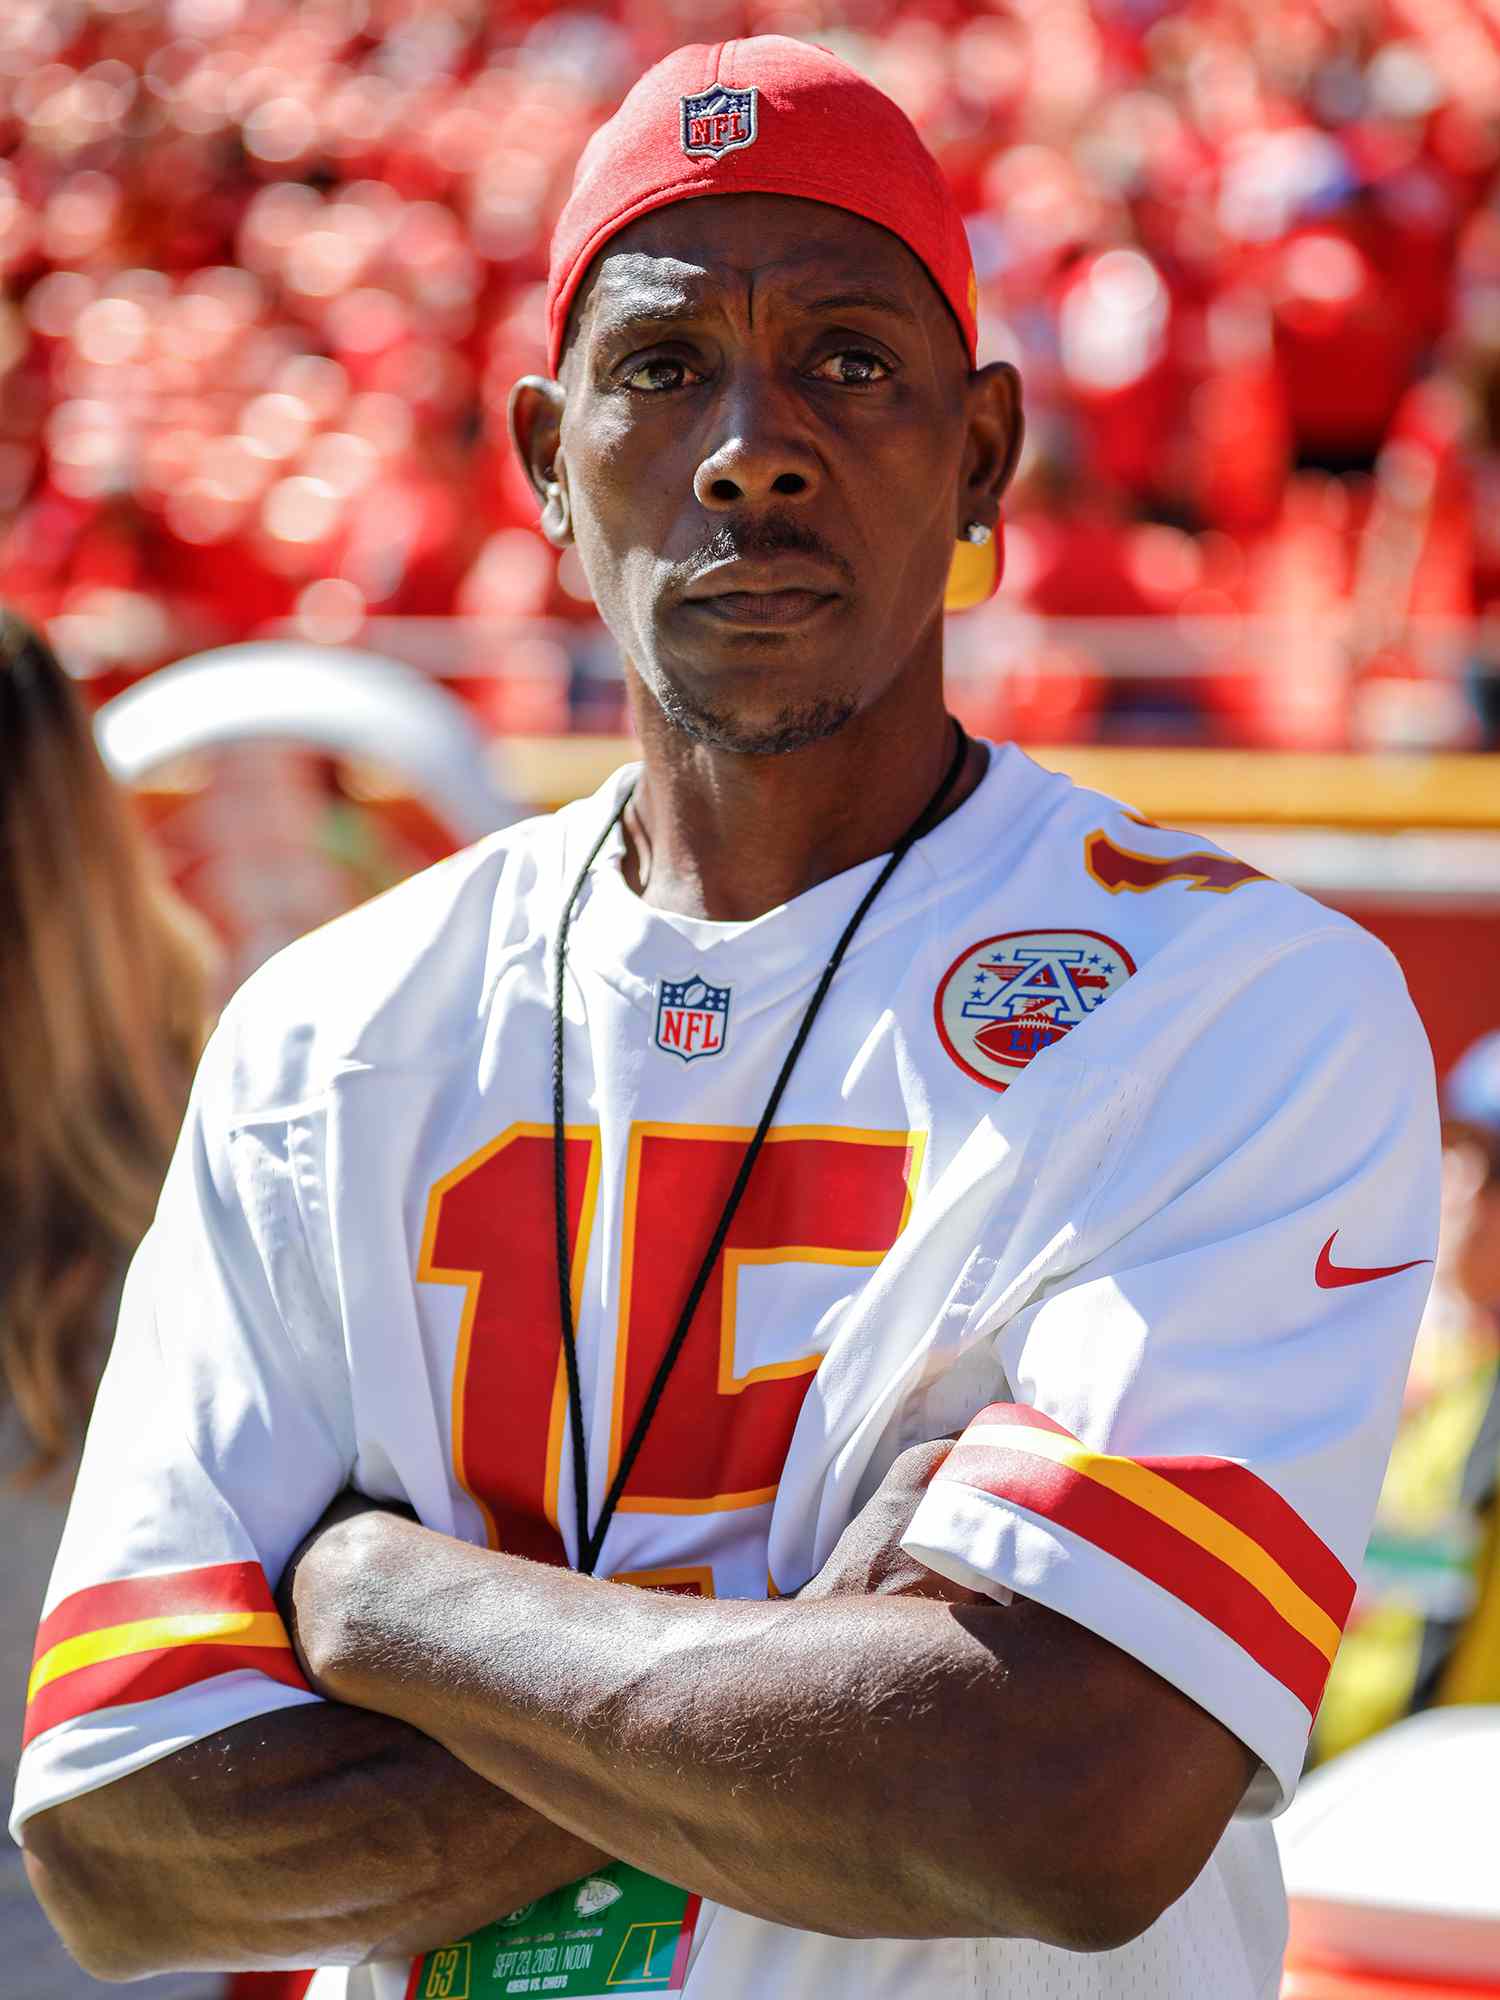 Patrick Mahomes Sr. is arrested again for the third time due to driving while being intoxicated. (Photo: People)